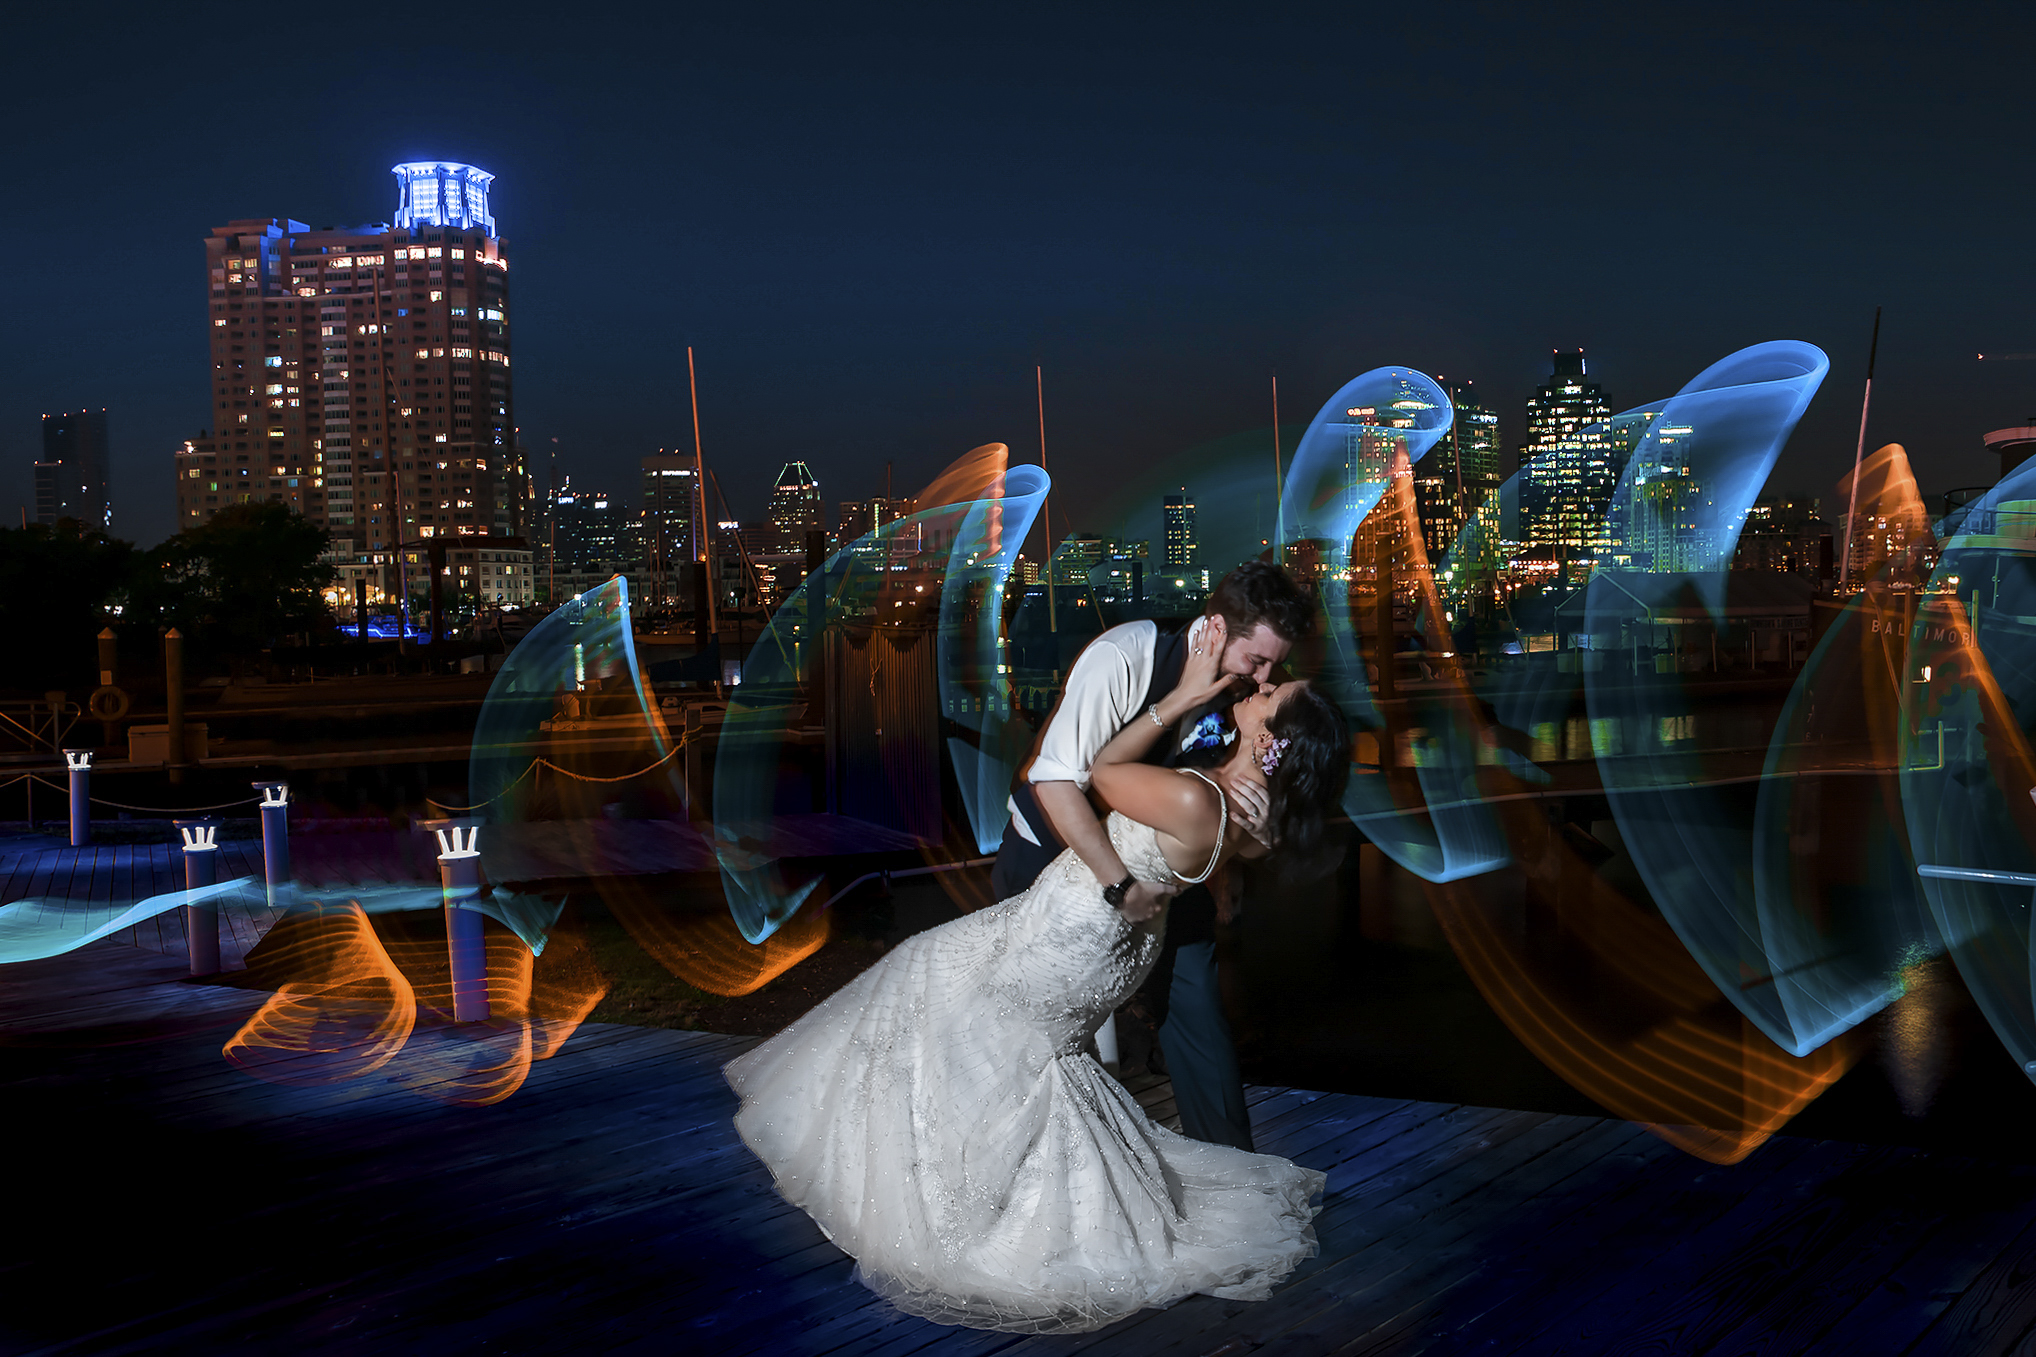 Baltimore+Museum+of+Industry+Wedding+Photos+-+Light+Painting+bride+and+groom+(1+of+1)+copy.jpg